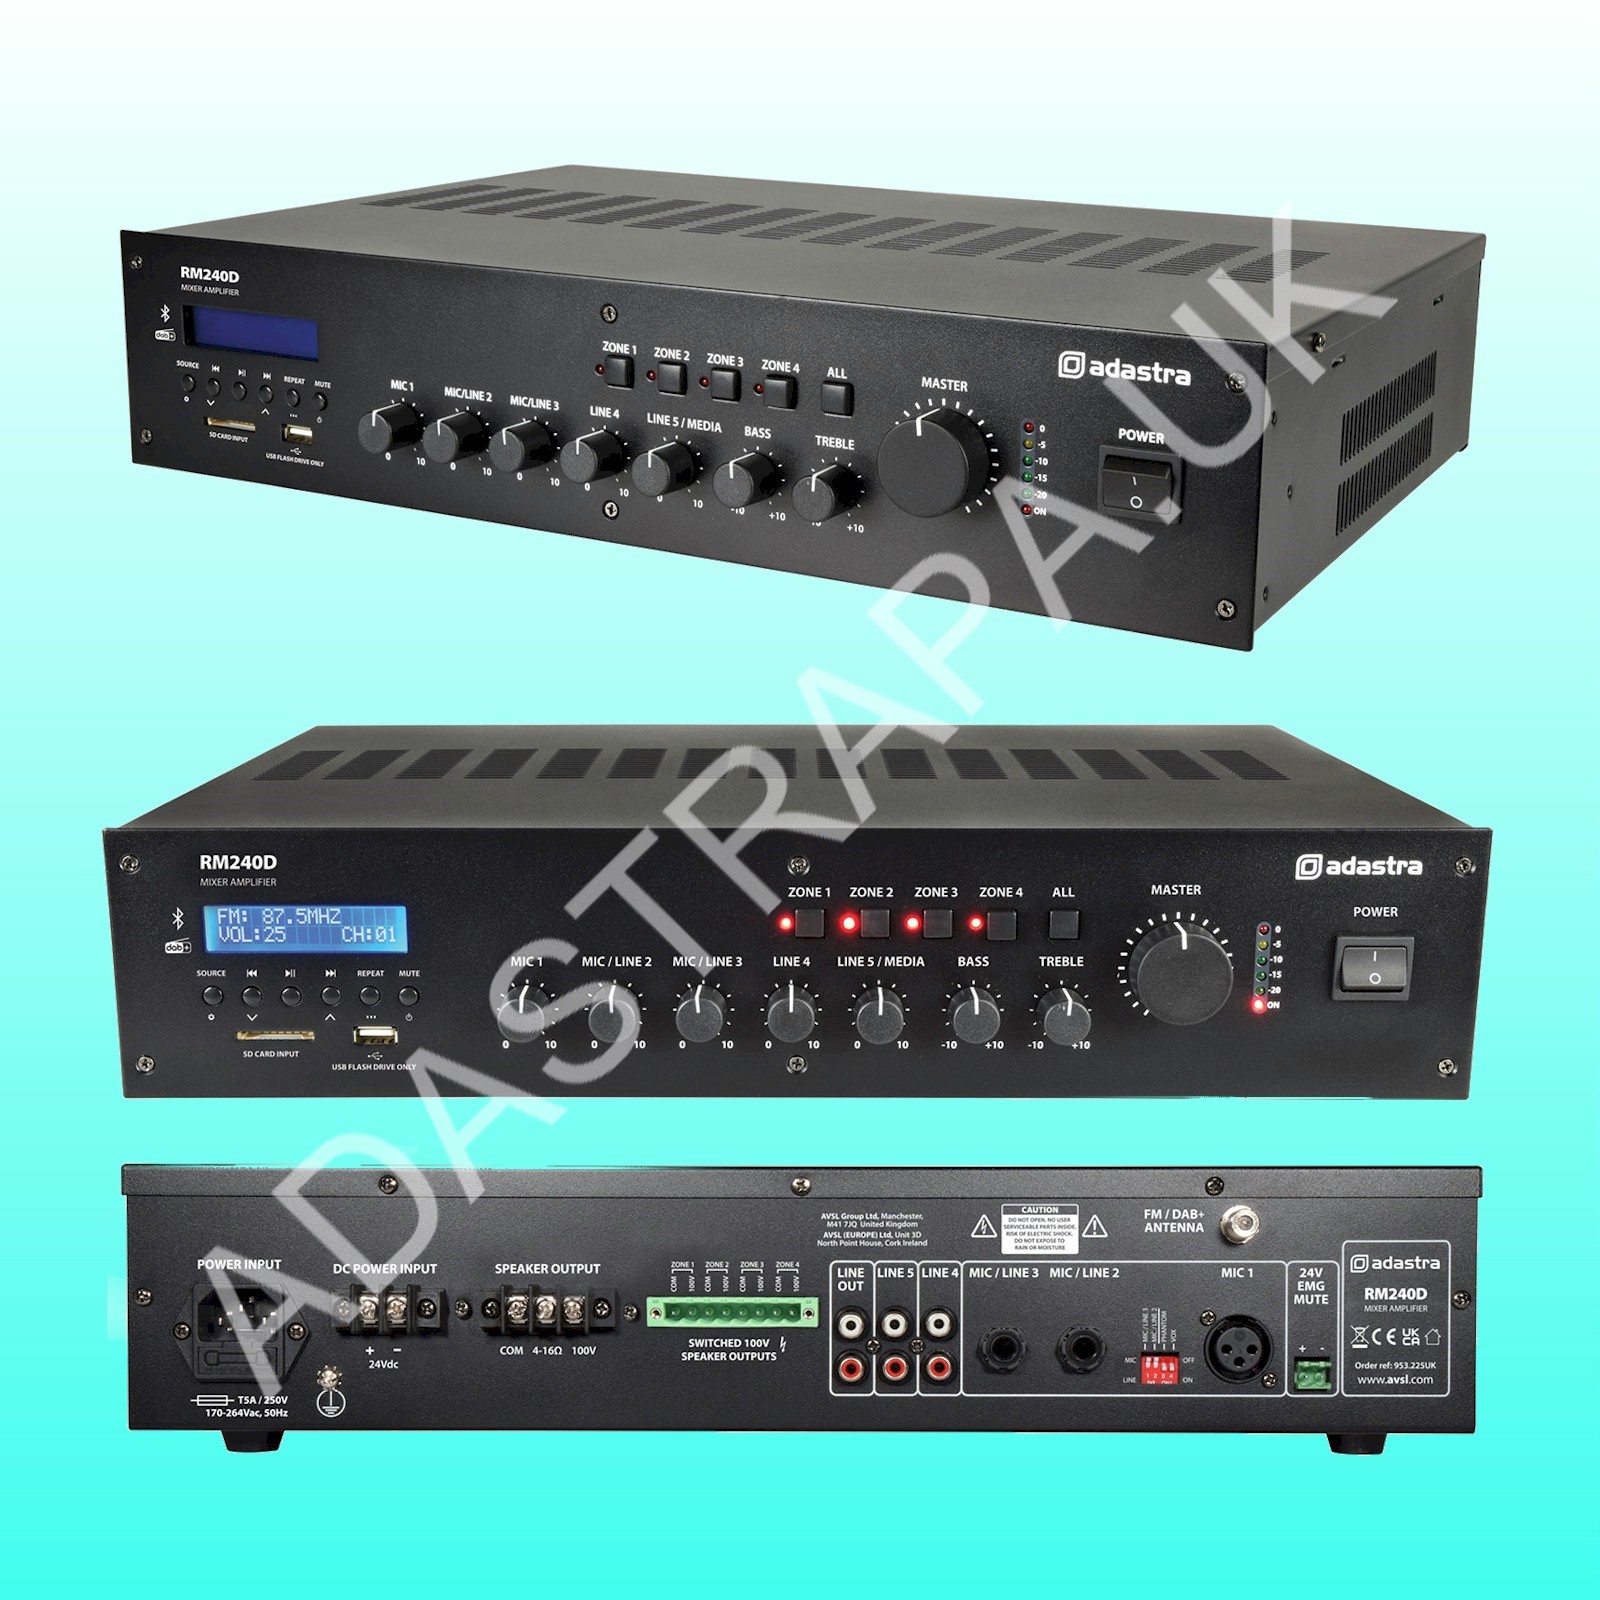 Adastra RM240D Rack Mount Mixer Amplifier 240W rms 100V Line/8 Ohm Speakers - 953.225UK